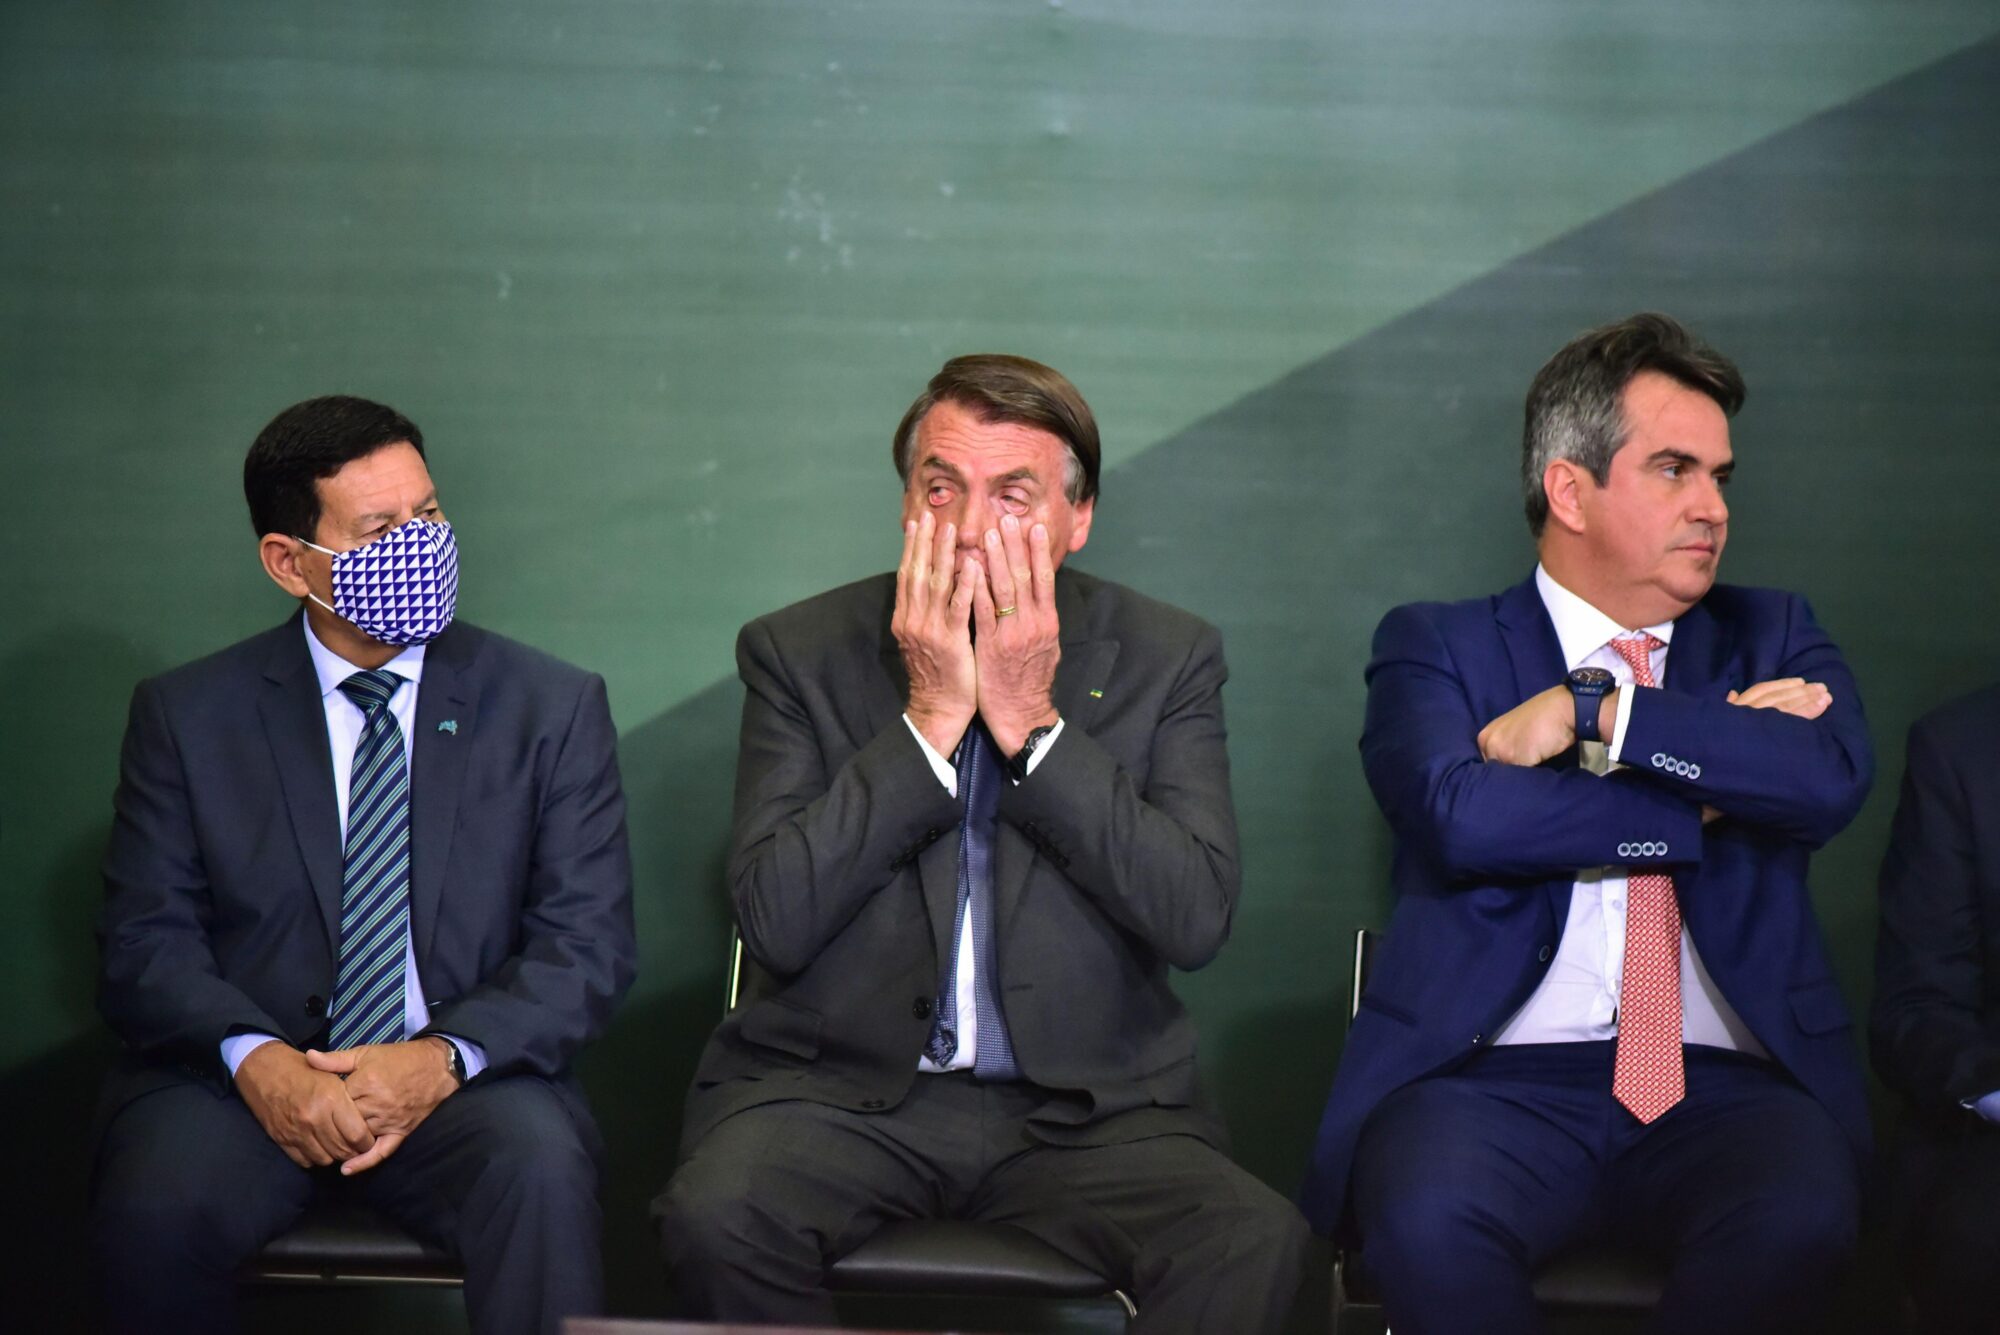 <p>President Jair Bolsonaro sits with vice-president Hamilton Mourão and minister Ciro Nogueira at the launch of the National Green Growth Program on 25 October. Government announcements in the run-up to COP26 have left experts and observers unsatisfied. (Image: Fotoarena / Alamy)</p>